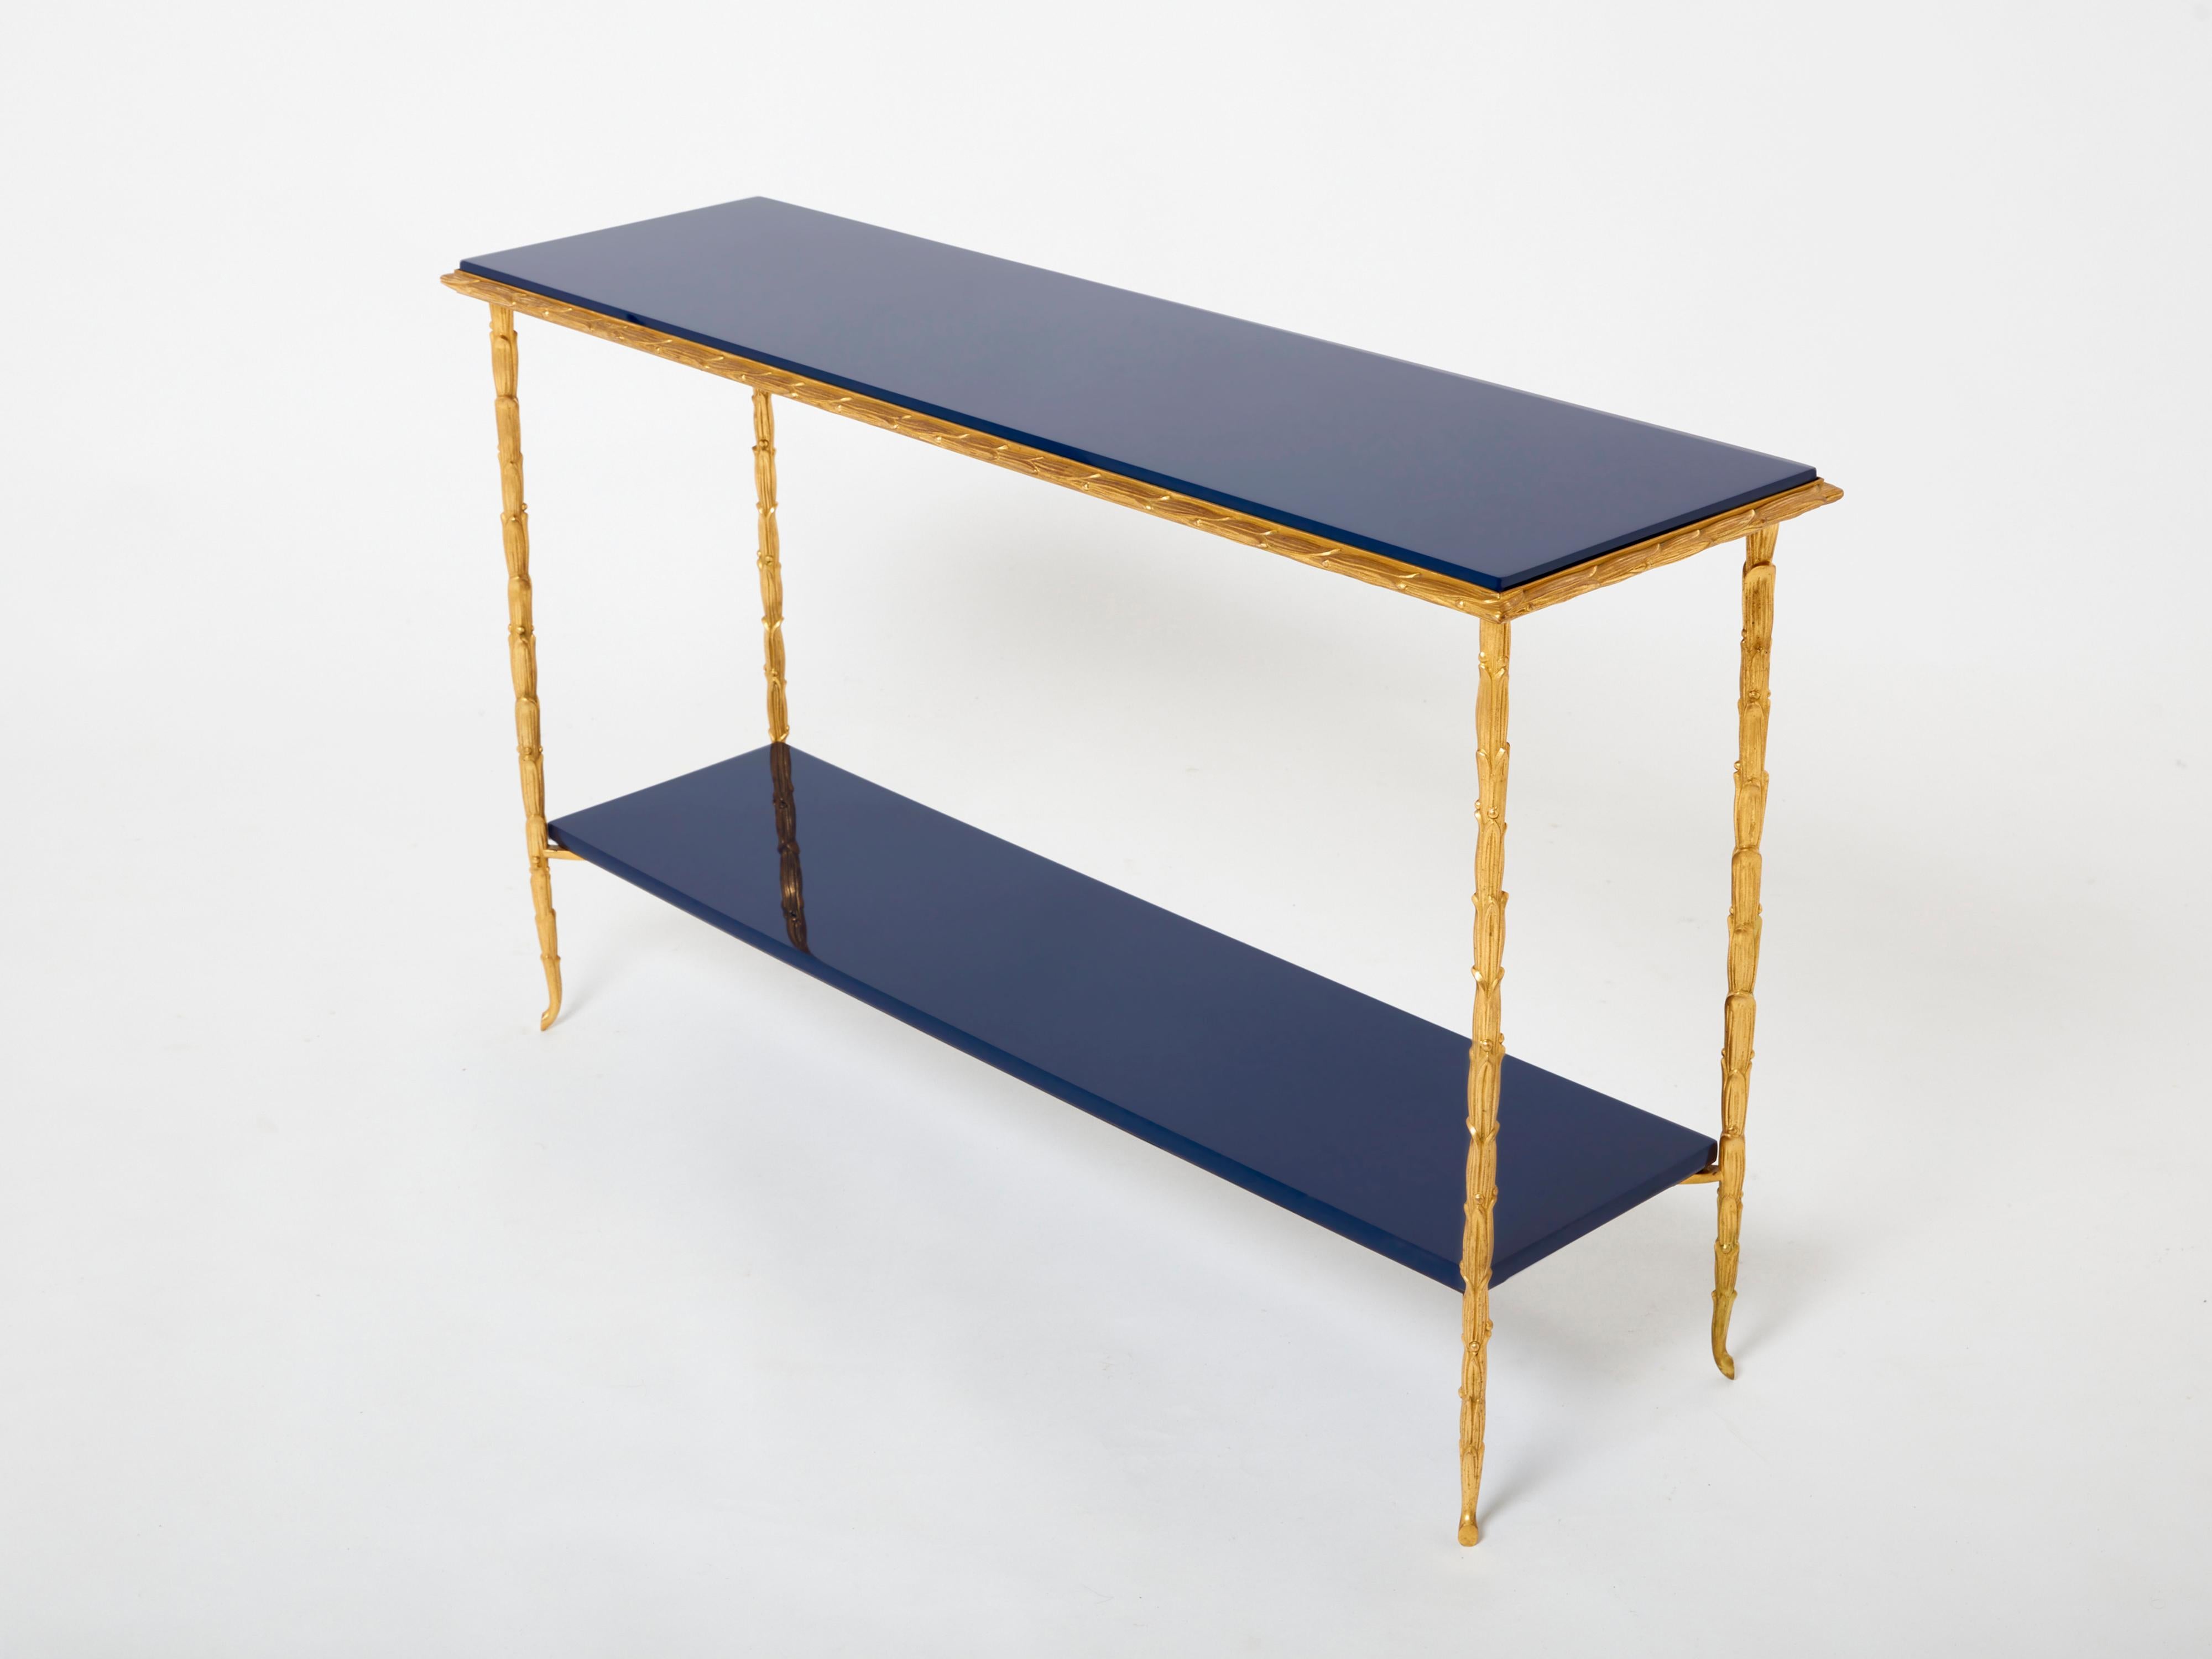 This beautiful two-tier console table by French house Maison Baguès was created in the early 1960s with solid foliage shaped bronze structure and a beautiful dark Ocean blue lacquered shelf and top. The dark blue lacquered shelves are deep and